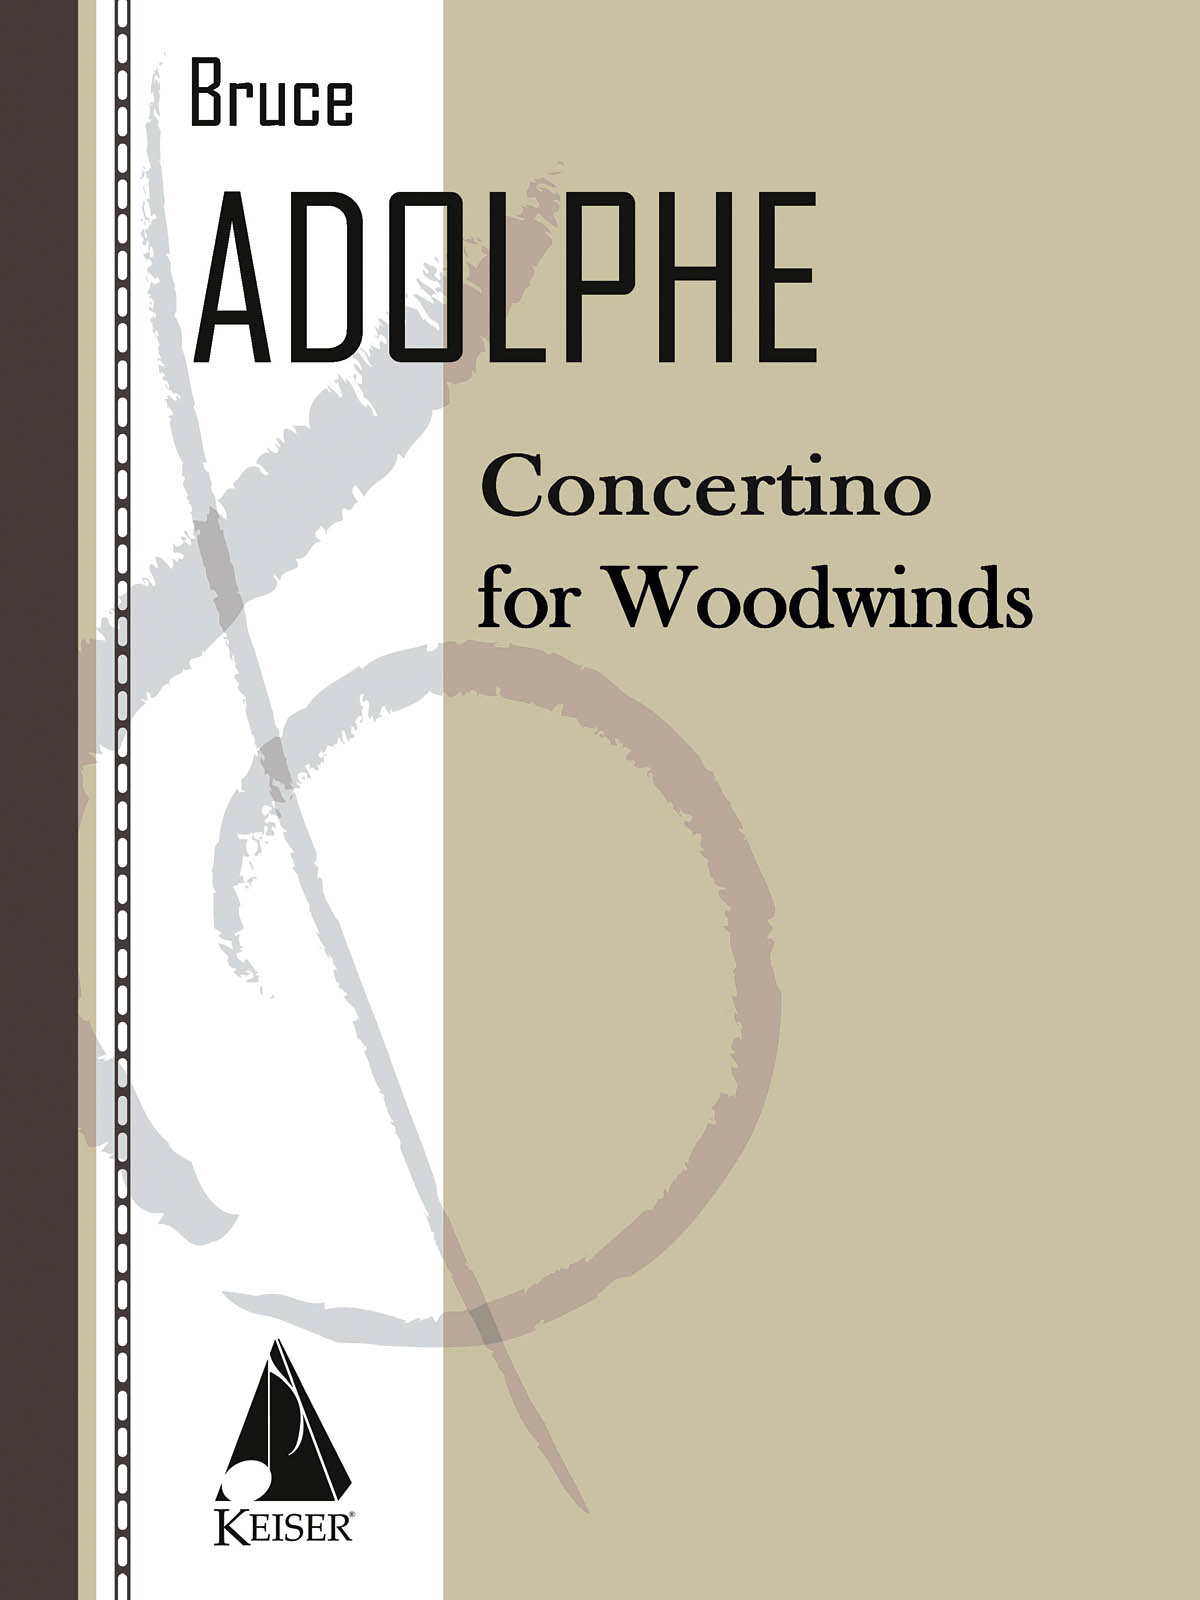 Concertino for Woodwinds (Wind Quartet): Orchestra and Solo: Score